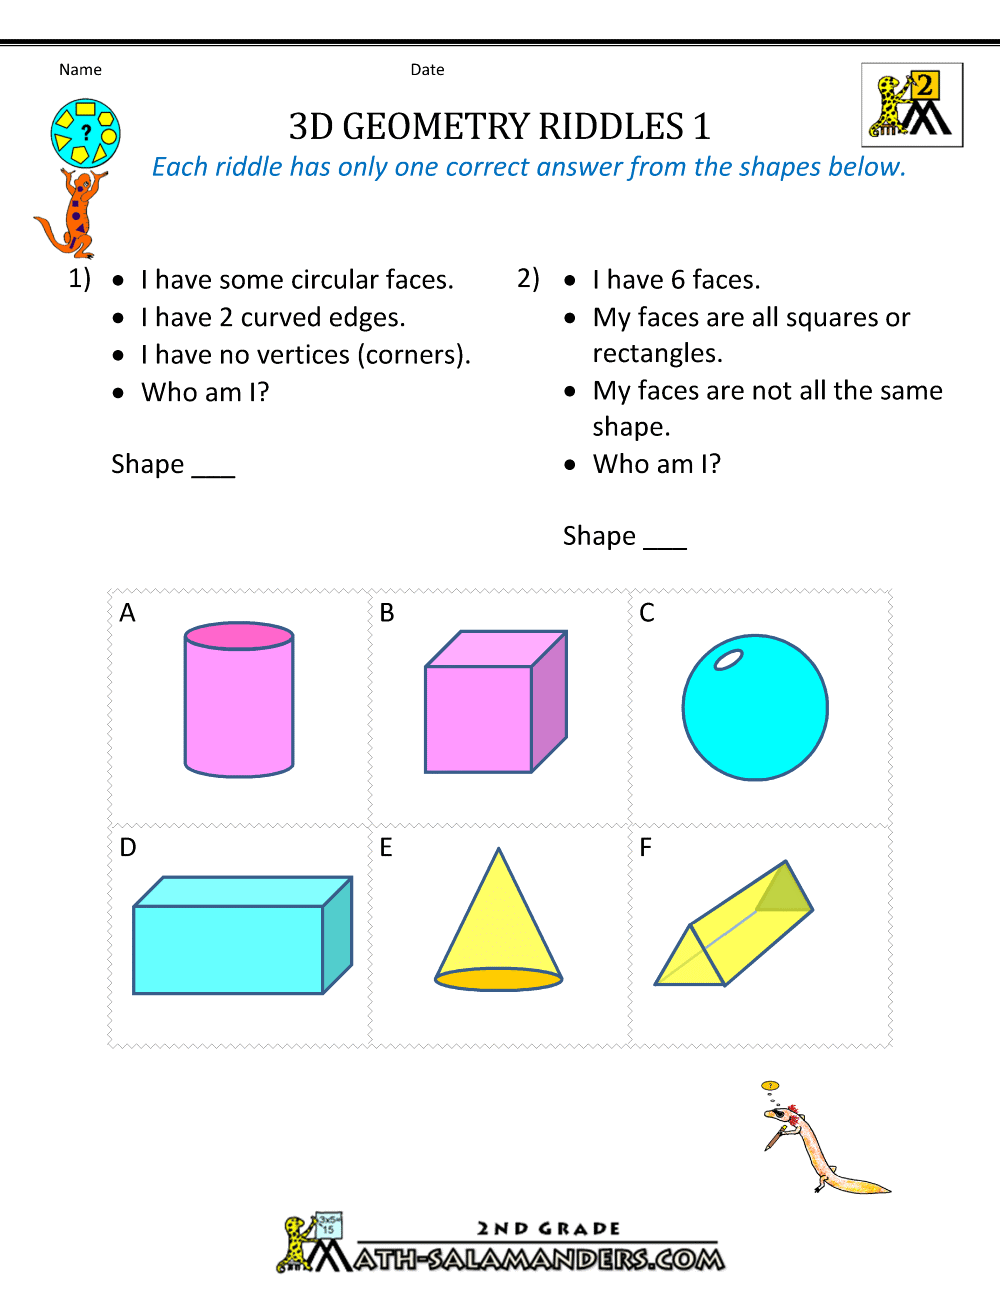 shapes in geometry